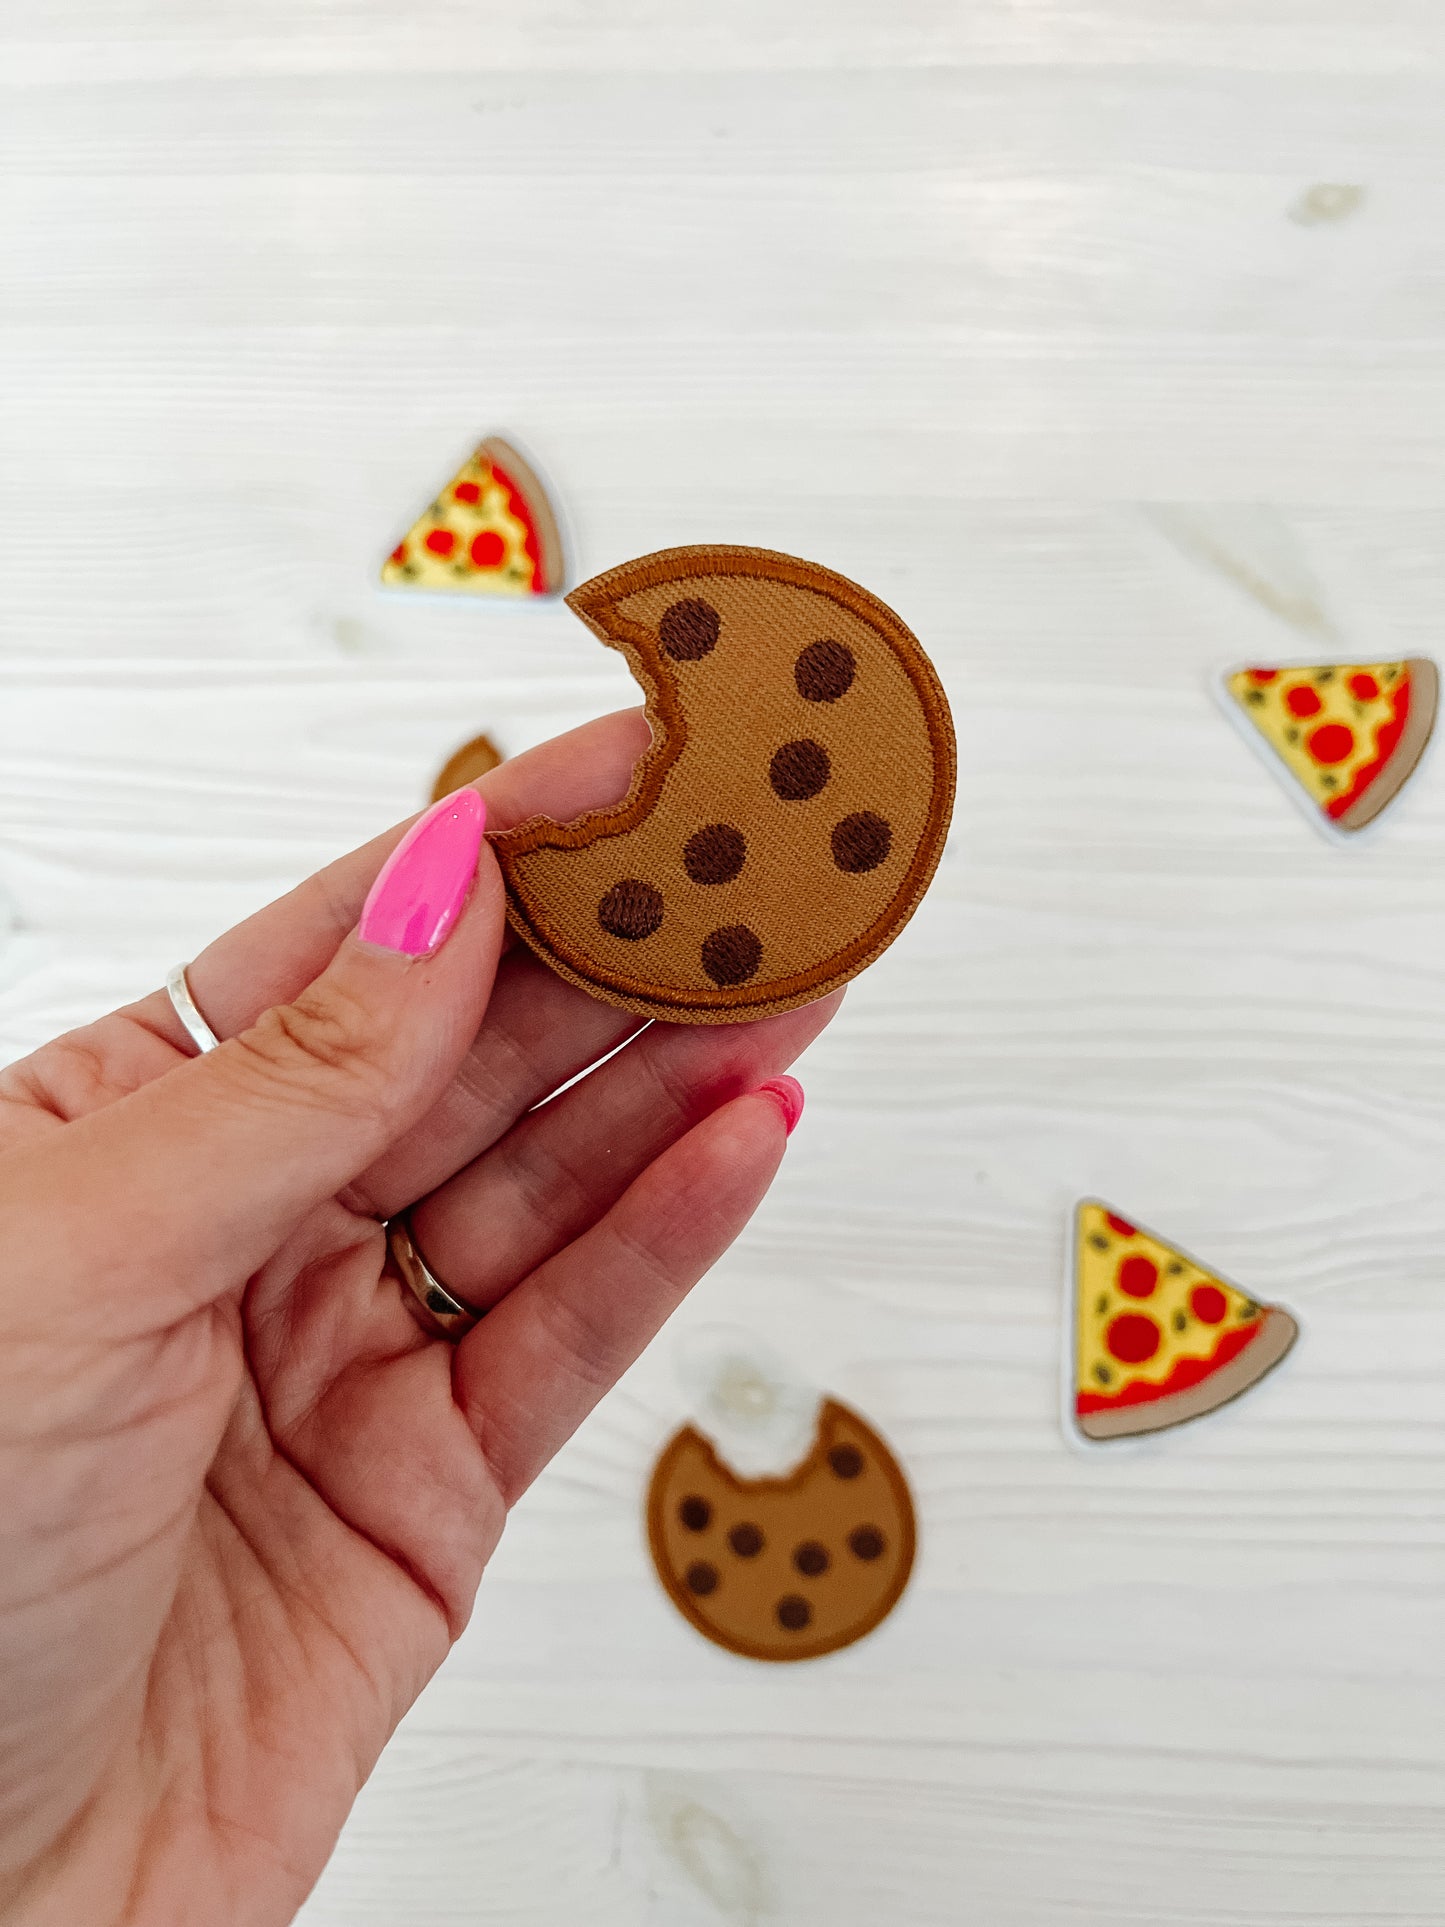 Here for the snacks - cookies & pizza patches